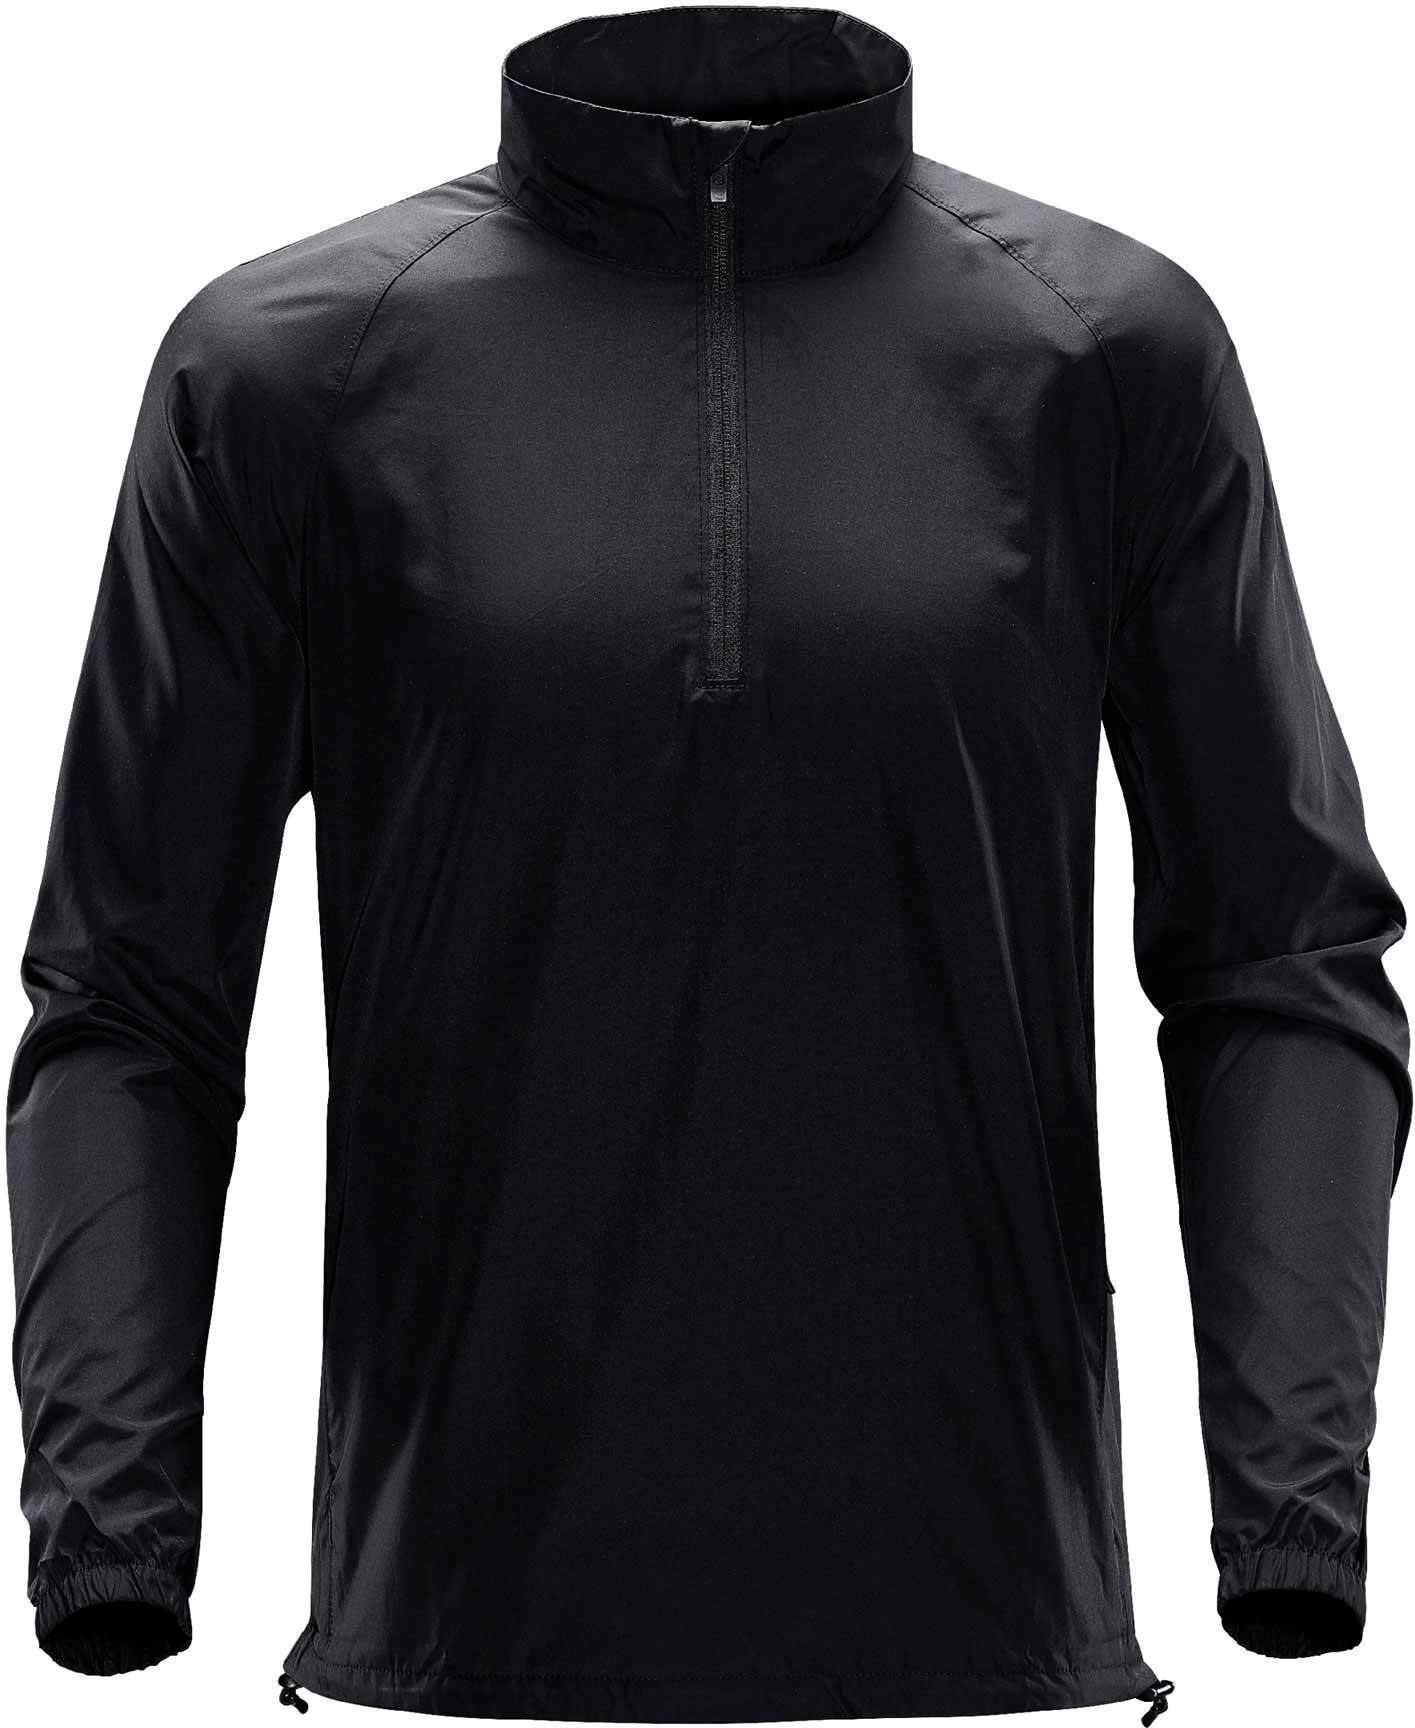 WR-2 Micro light 2 windshirt pour homme